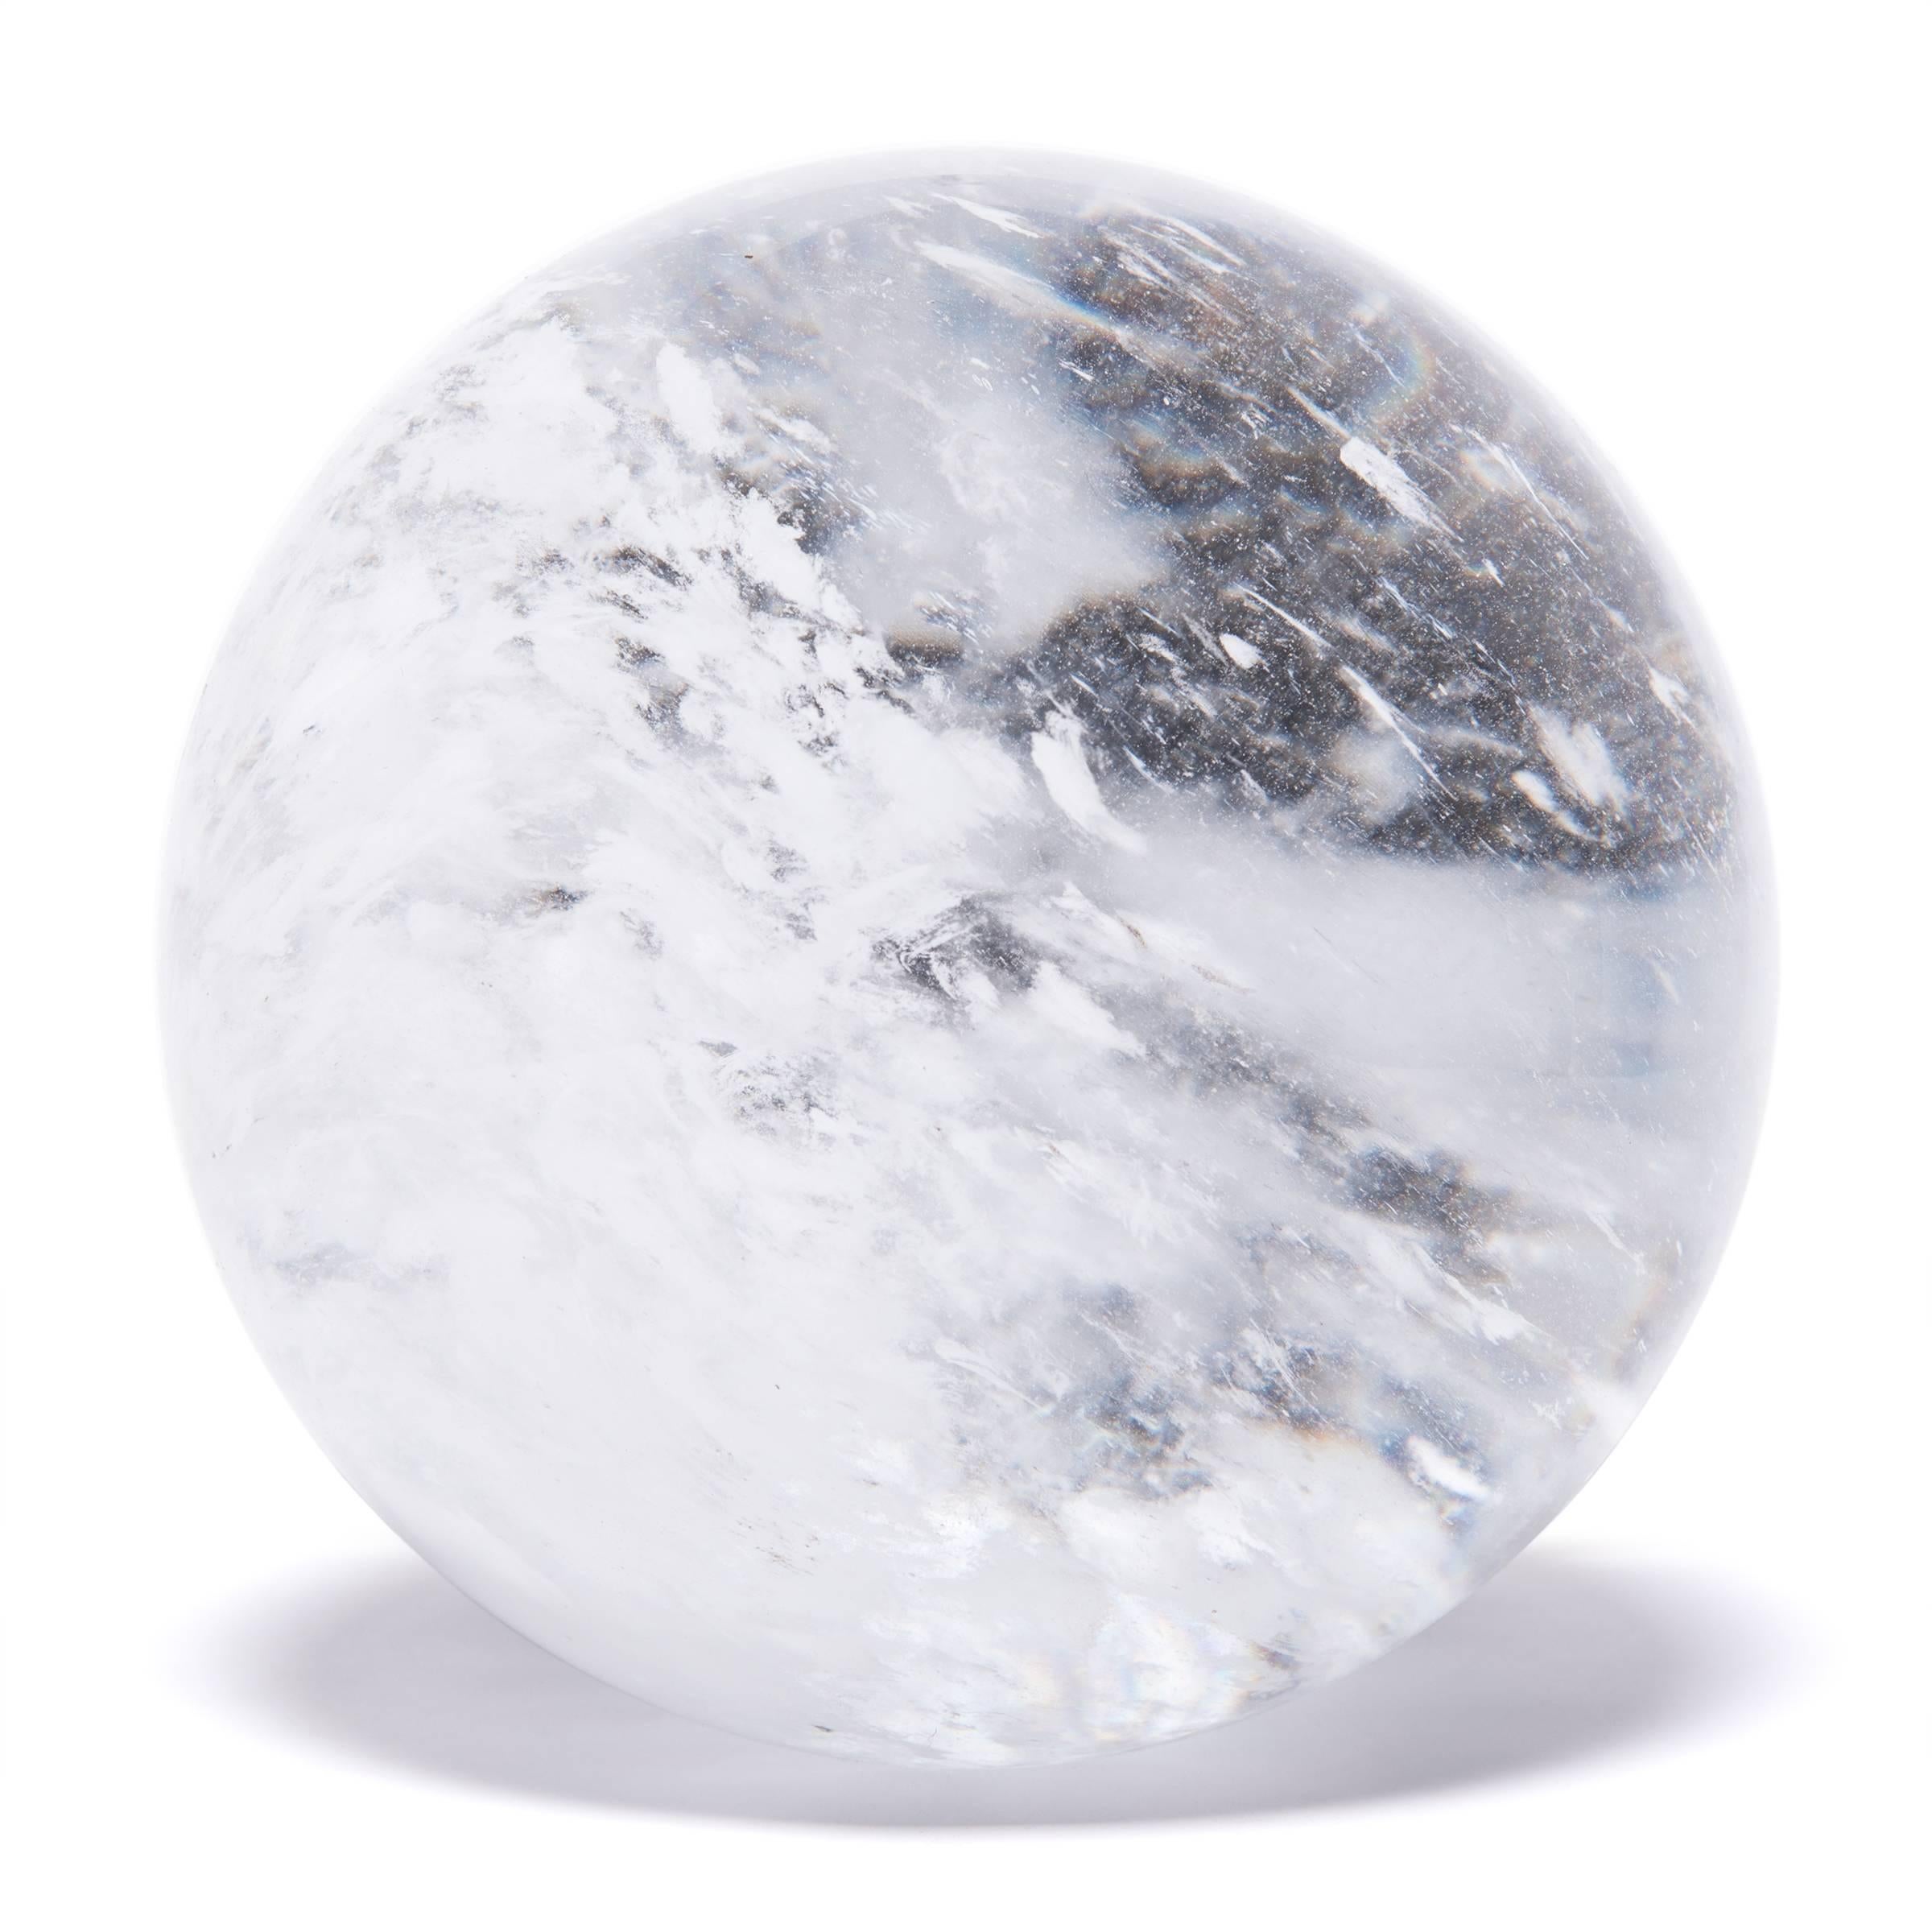 Gem lore is endless, and every culture has its own beliefs about specific stones tied to cultural history, geography, and spiritual practices. In China, some practitioners of Feng Shui value clear quartz, like this beautiful crystal ball, for its